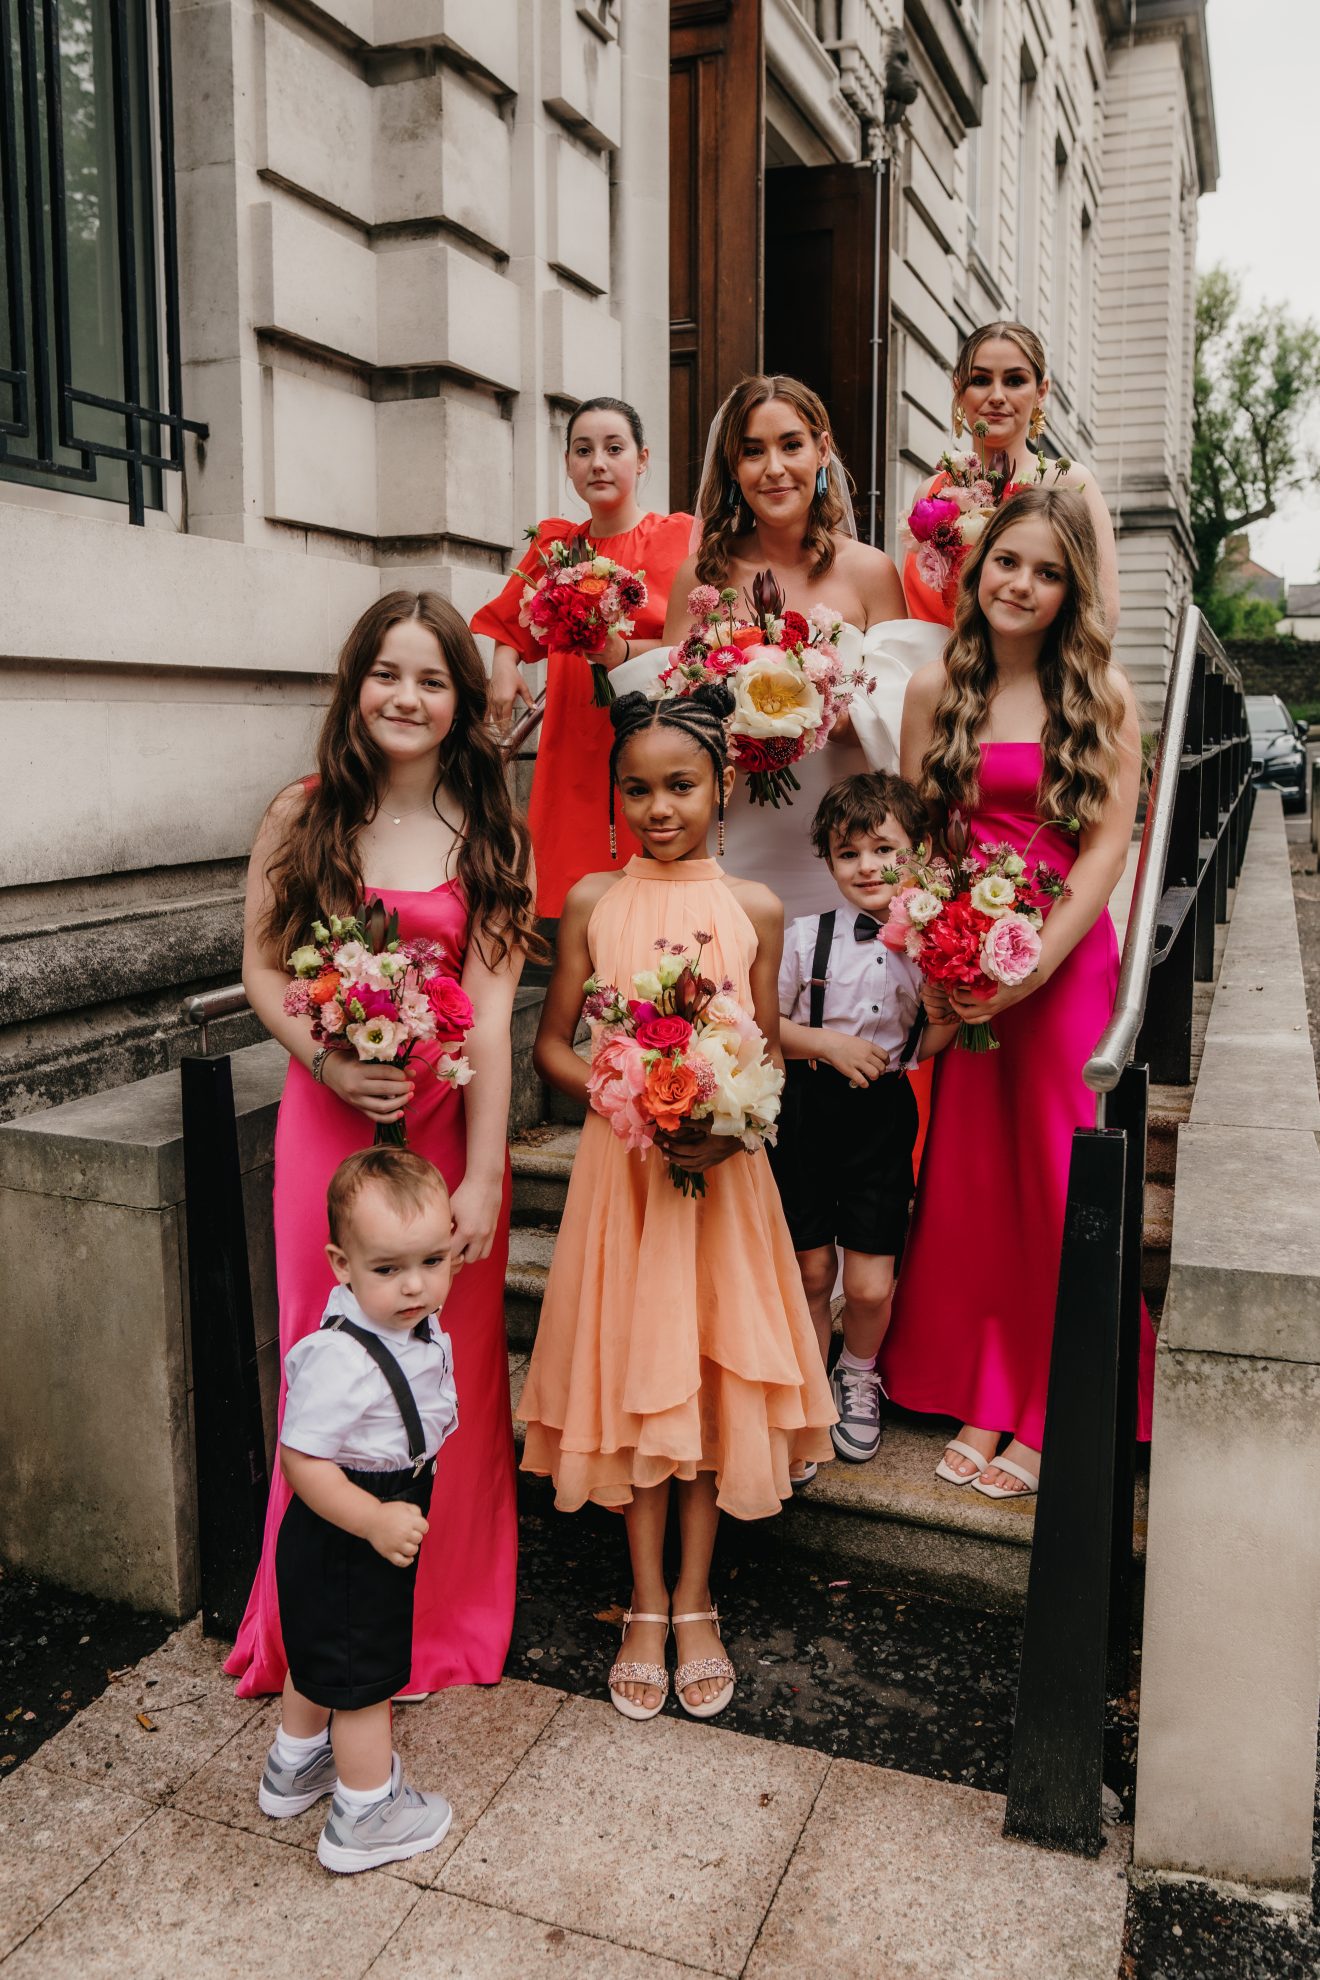 Jael with her bridesmaids on her wedding day